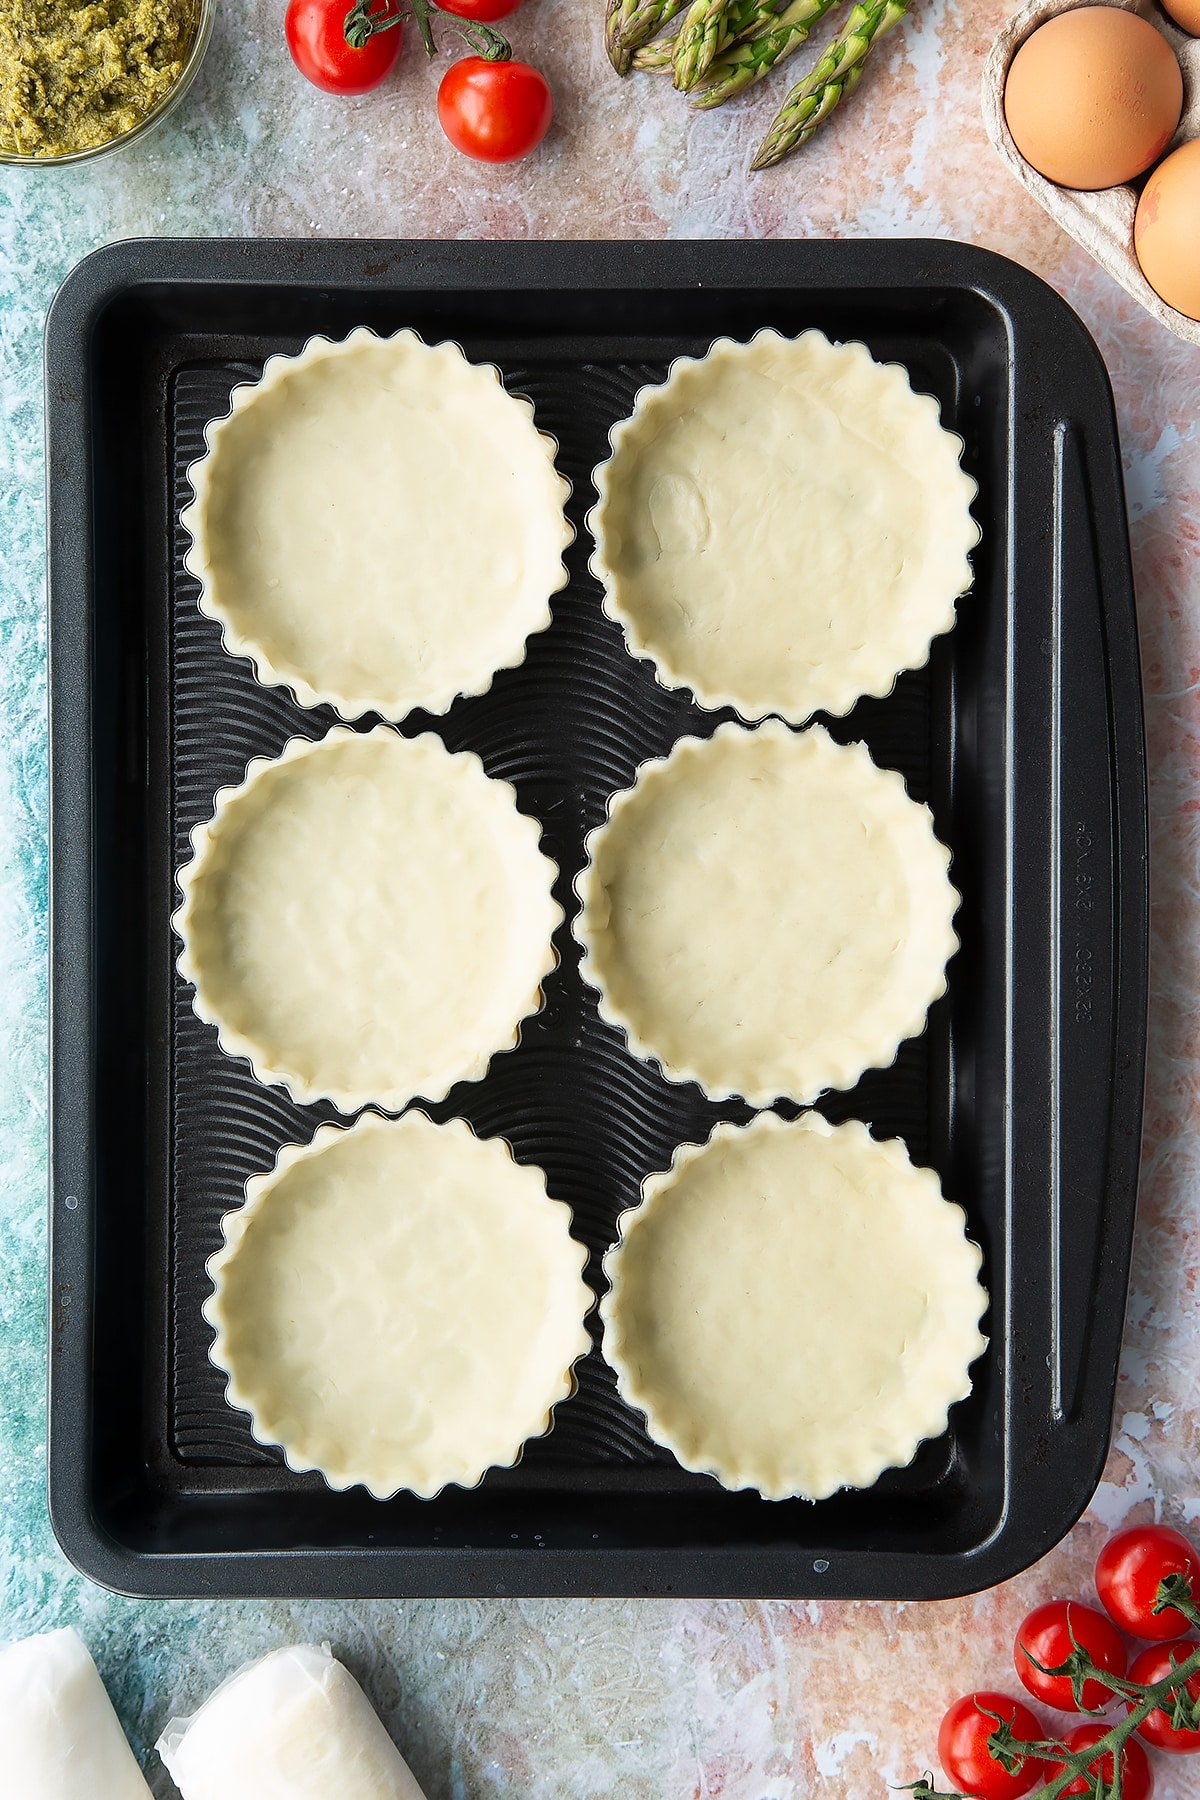 Six tartlet tins on a baking tray. Pastry is fitted and trimmed in the tins. Ingredients to make asparagus tartlets surround the tray.